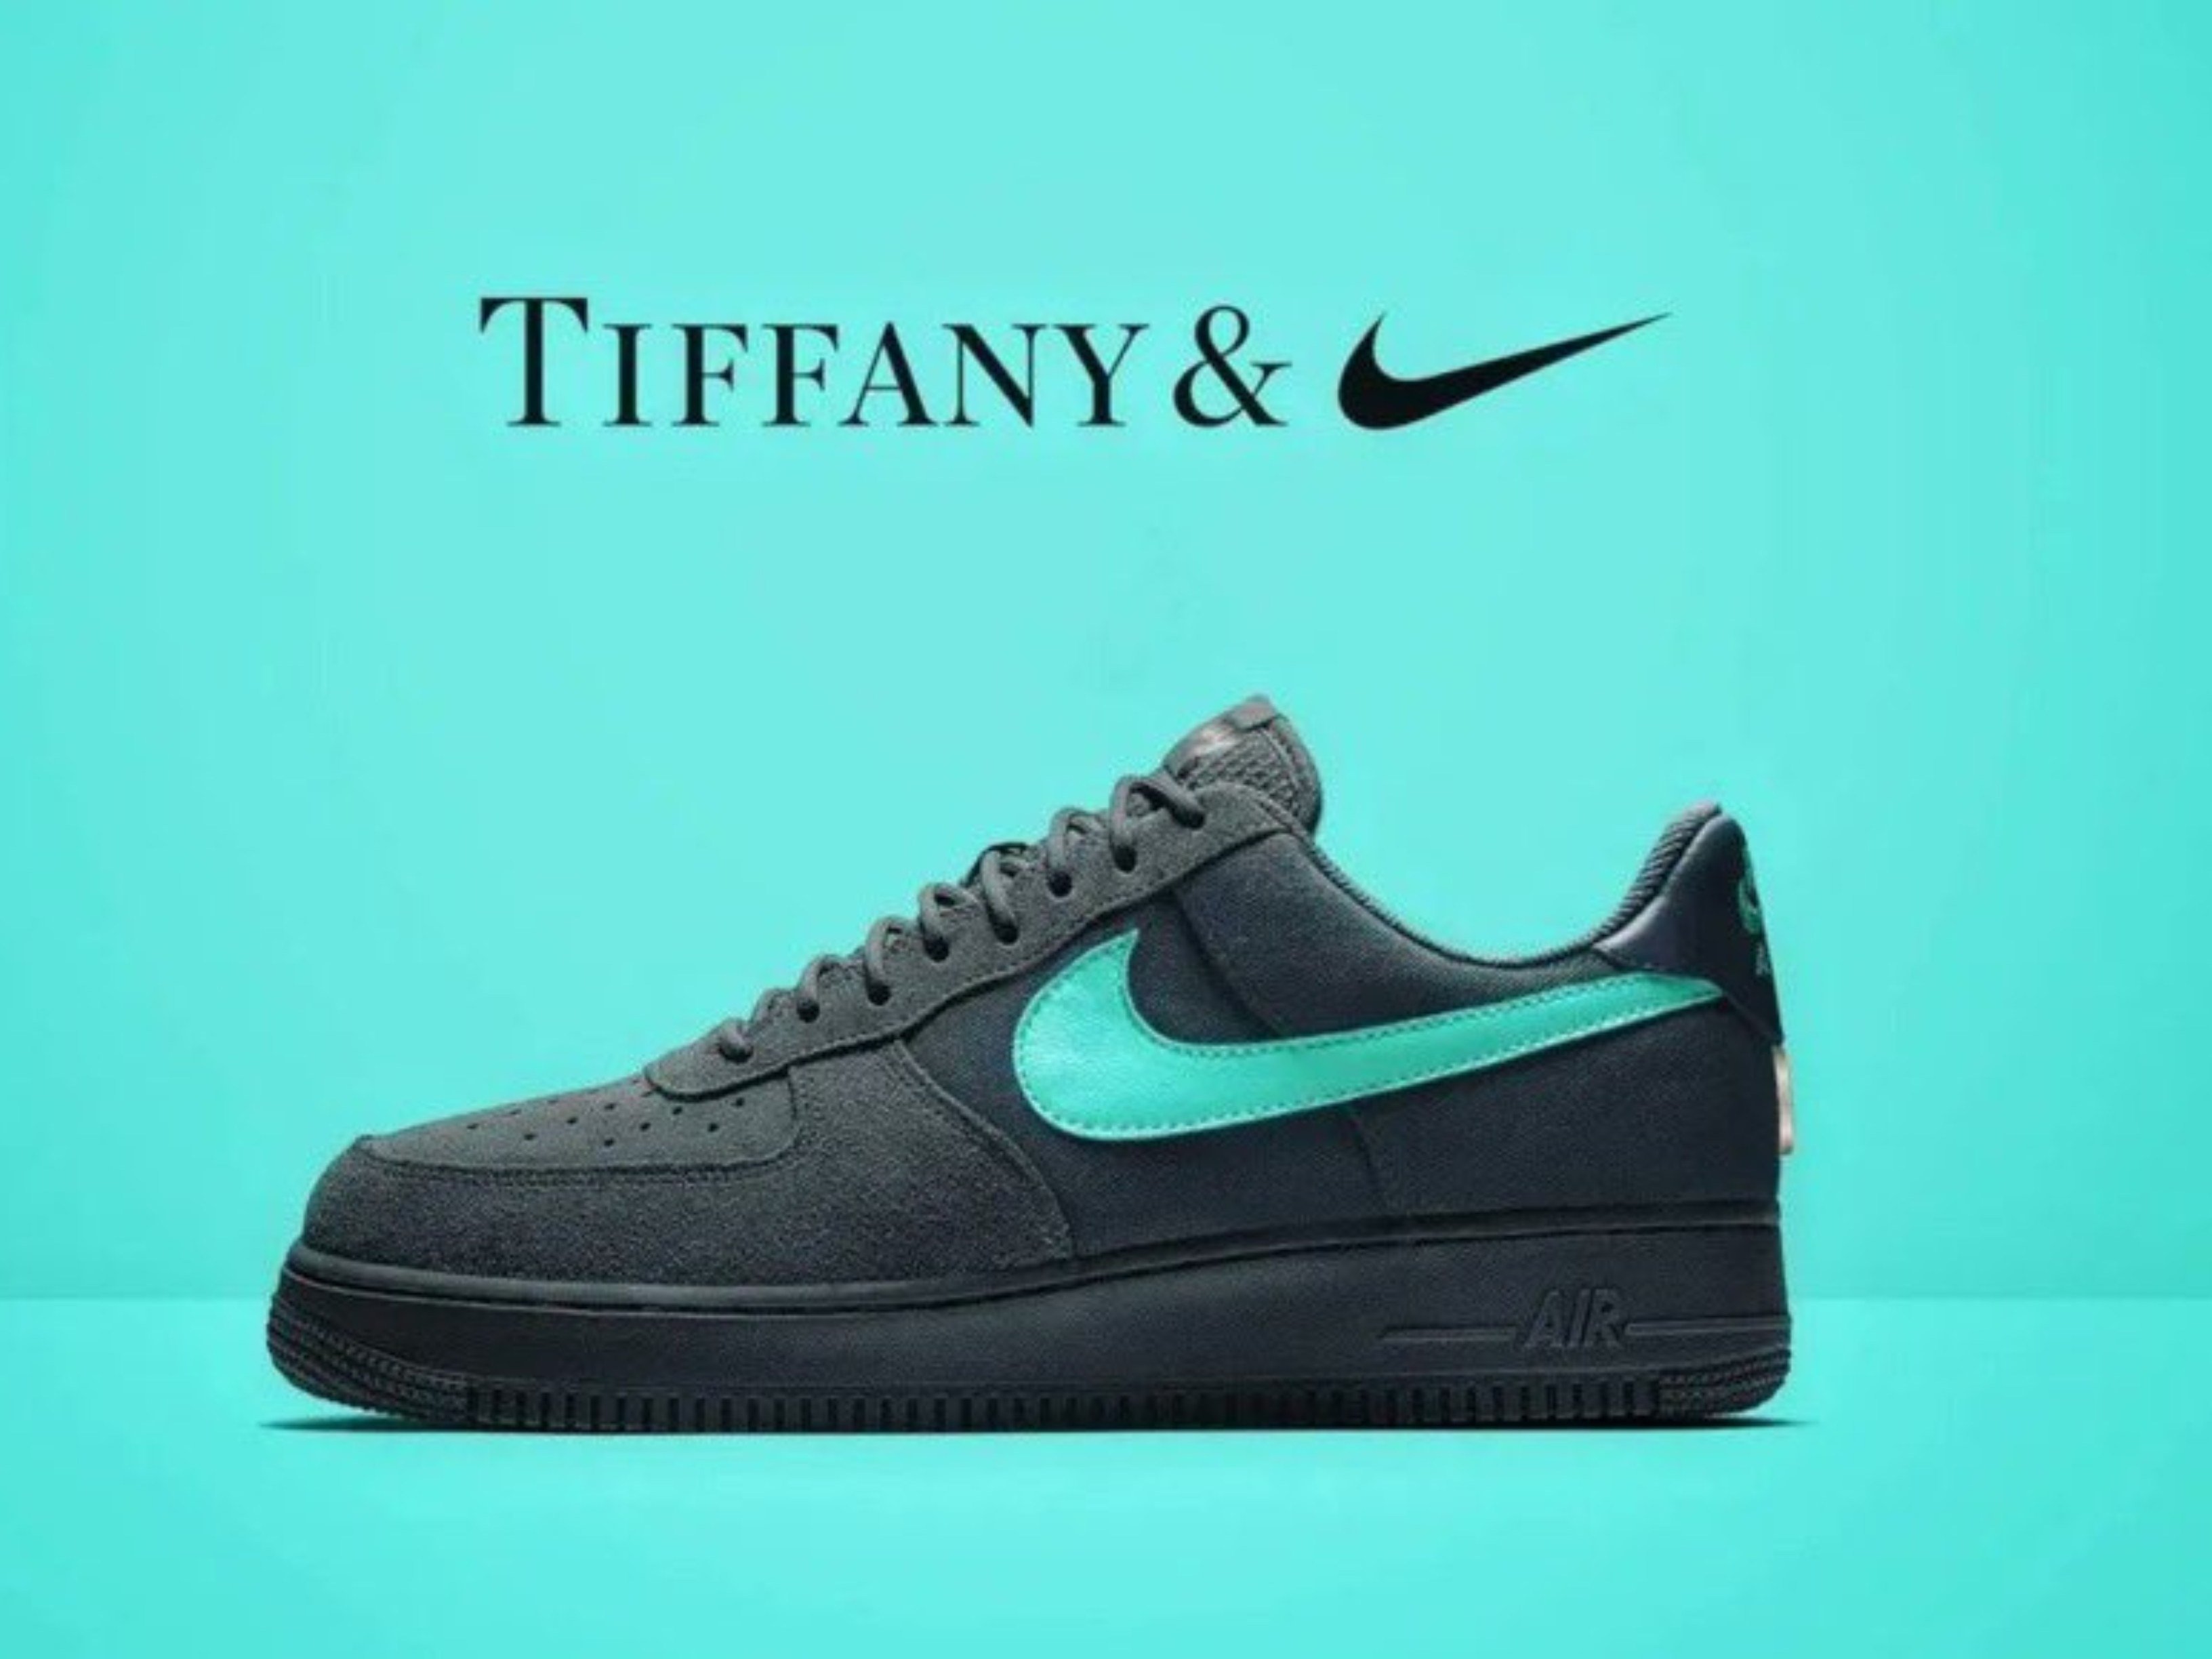 Nike Tiffany & Co. to launch US$400 sneakers: the Air Force 1 '1837' limited-edition shoe collaboration comes after the LVMH brand Beyoncé and – but some are calling